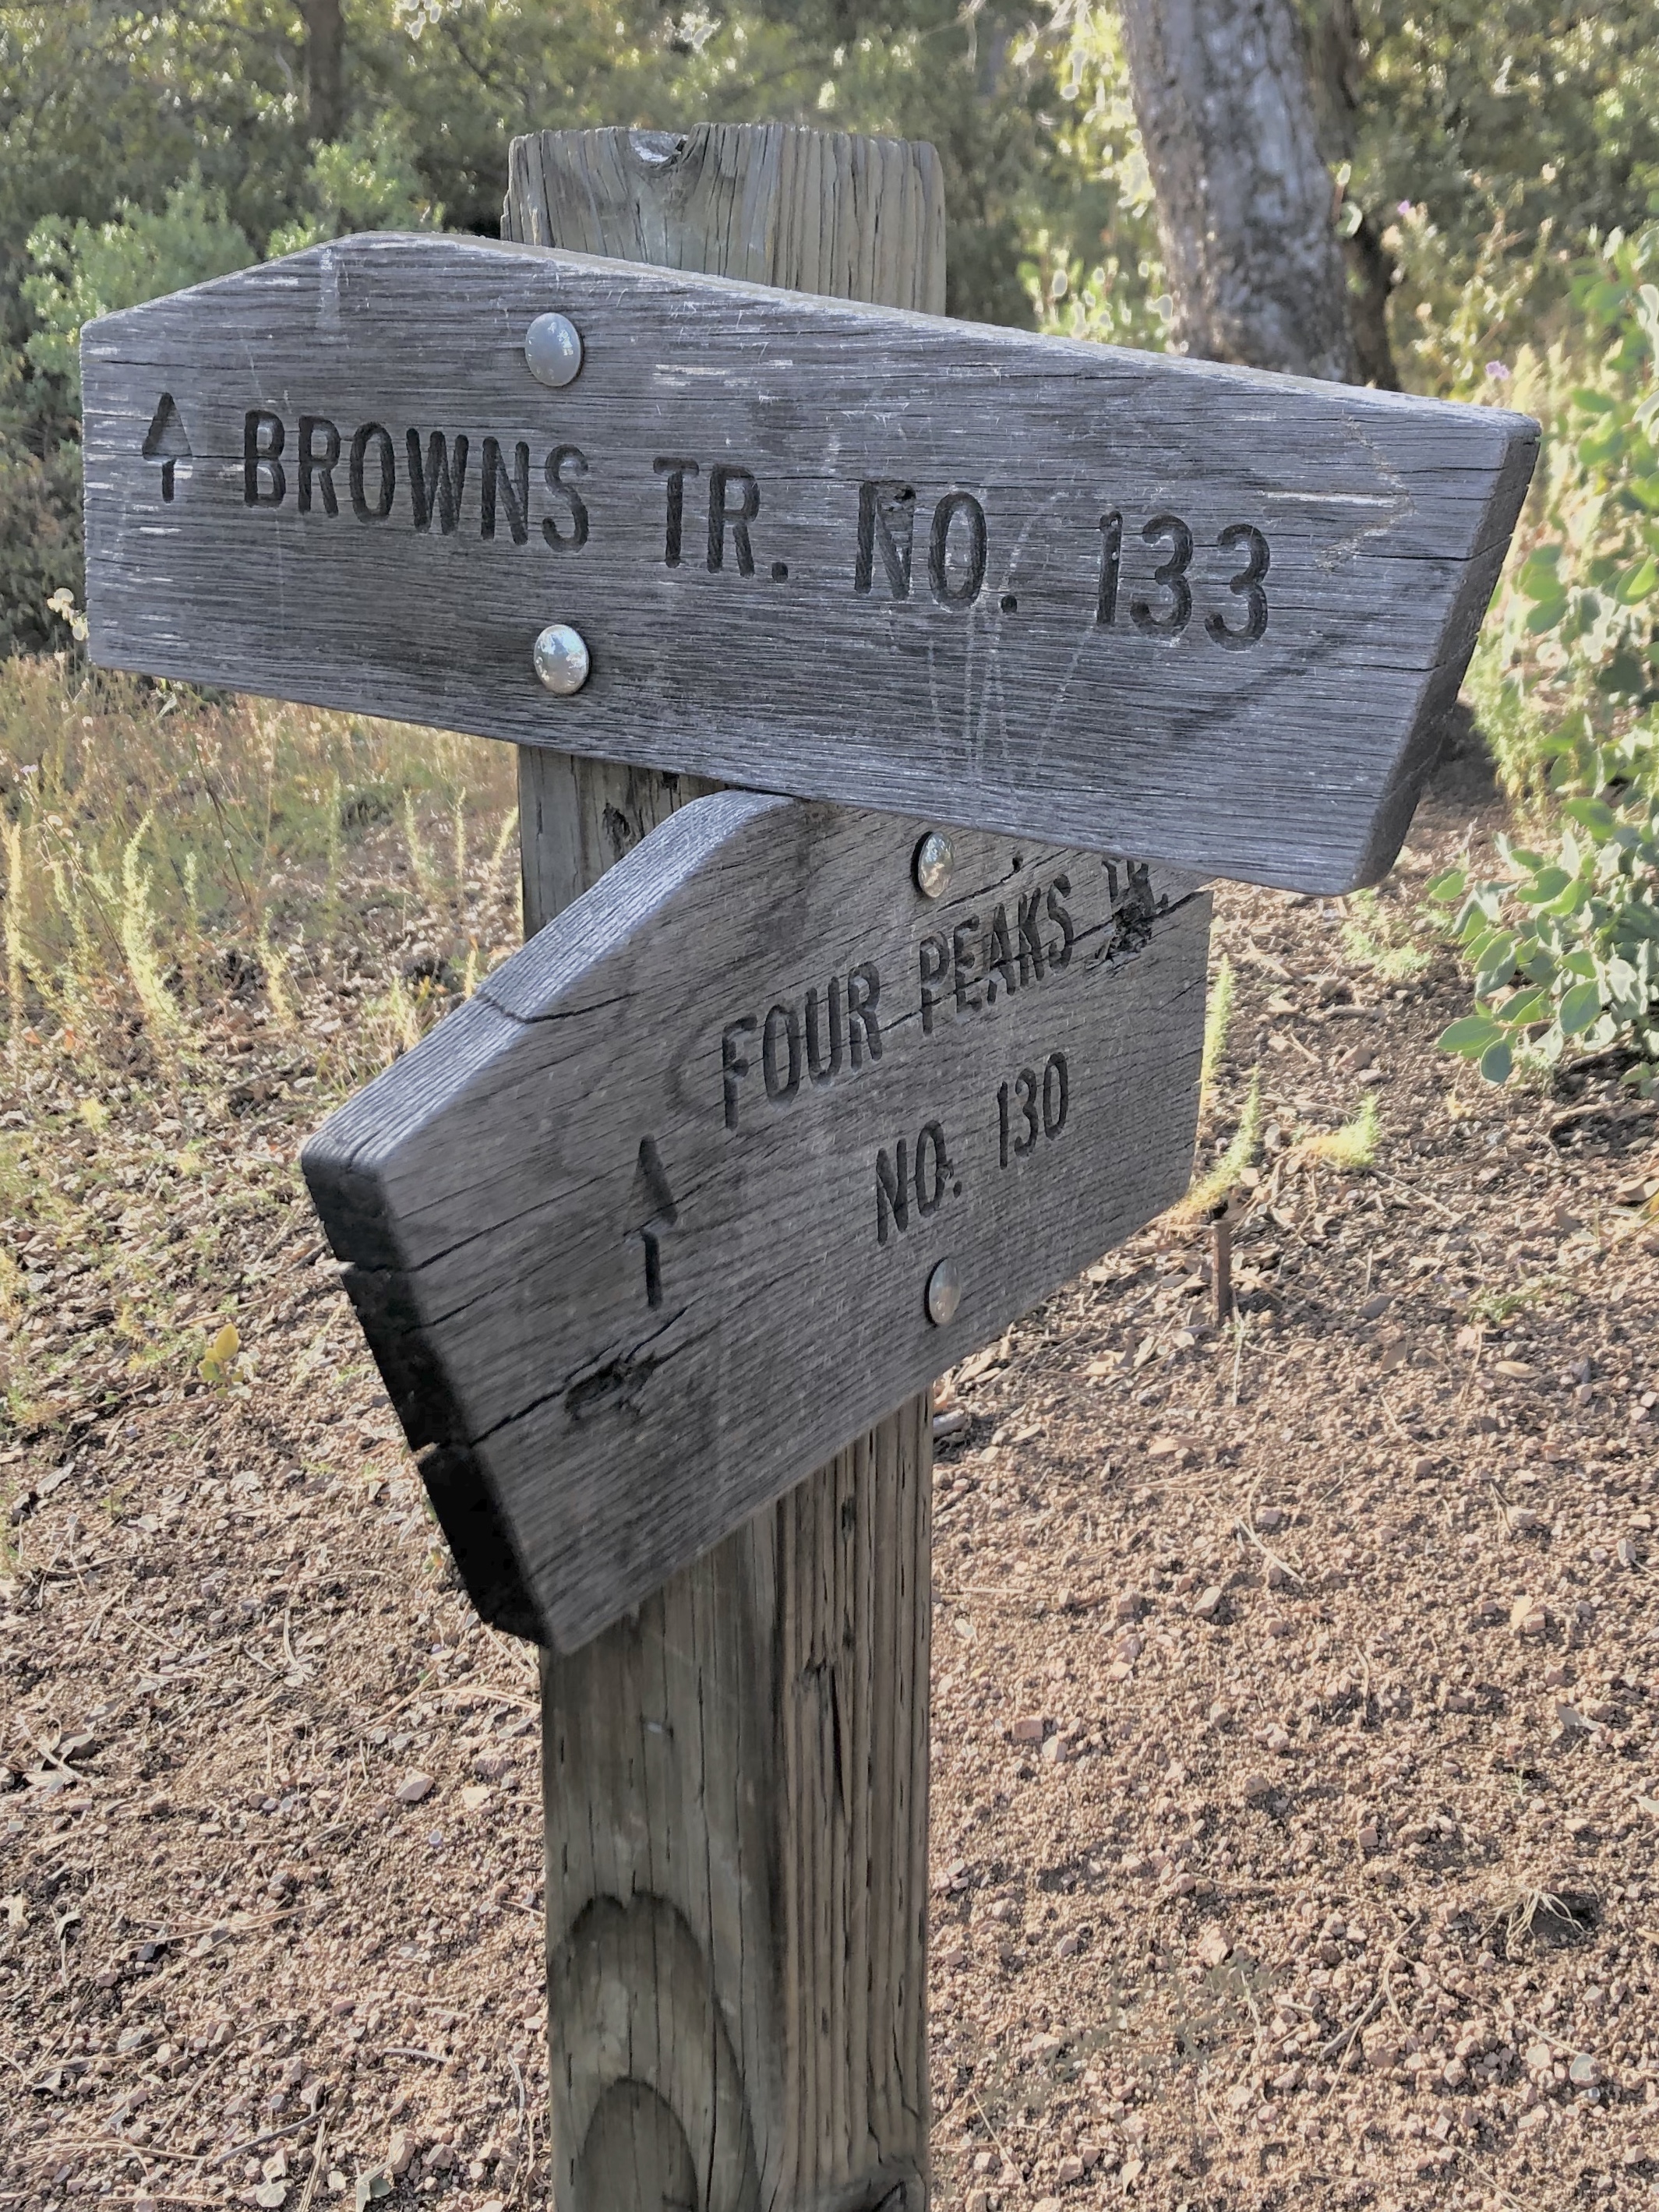 Wooden trail sign showing browns trail number 133